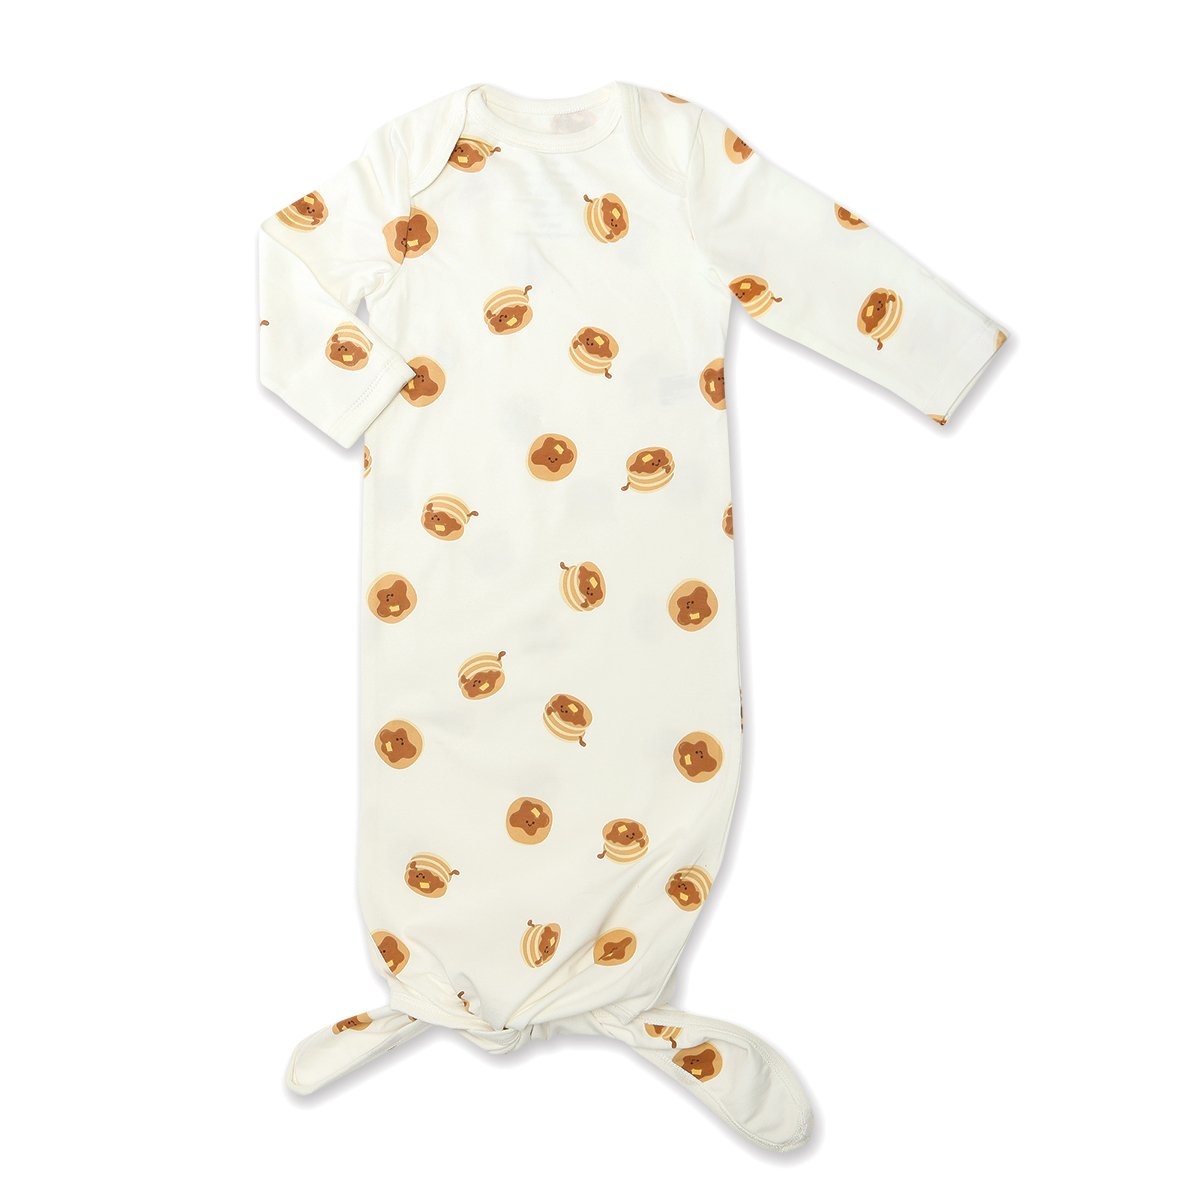 Silkberry Baby Organic Cotton Knotted Sleeper